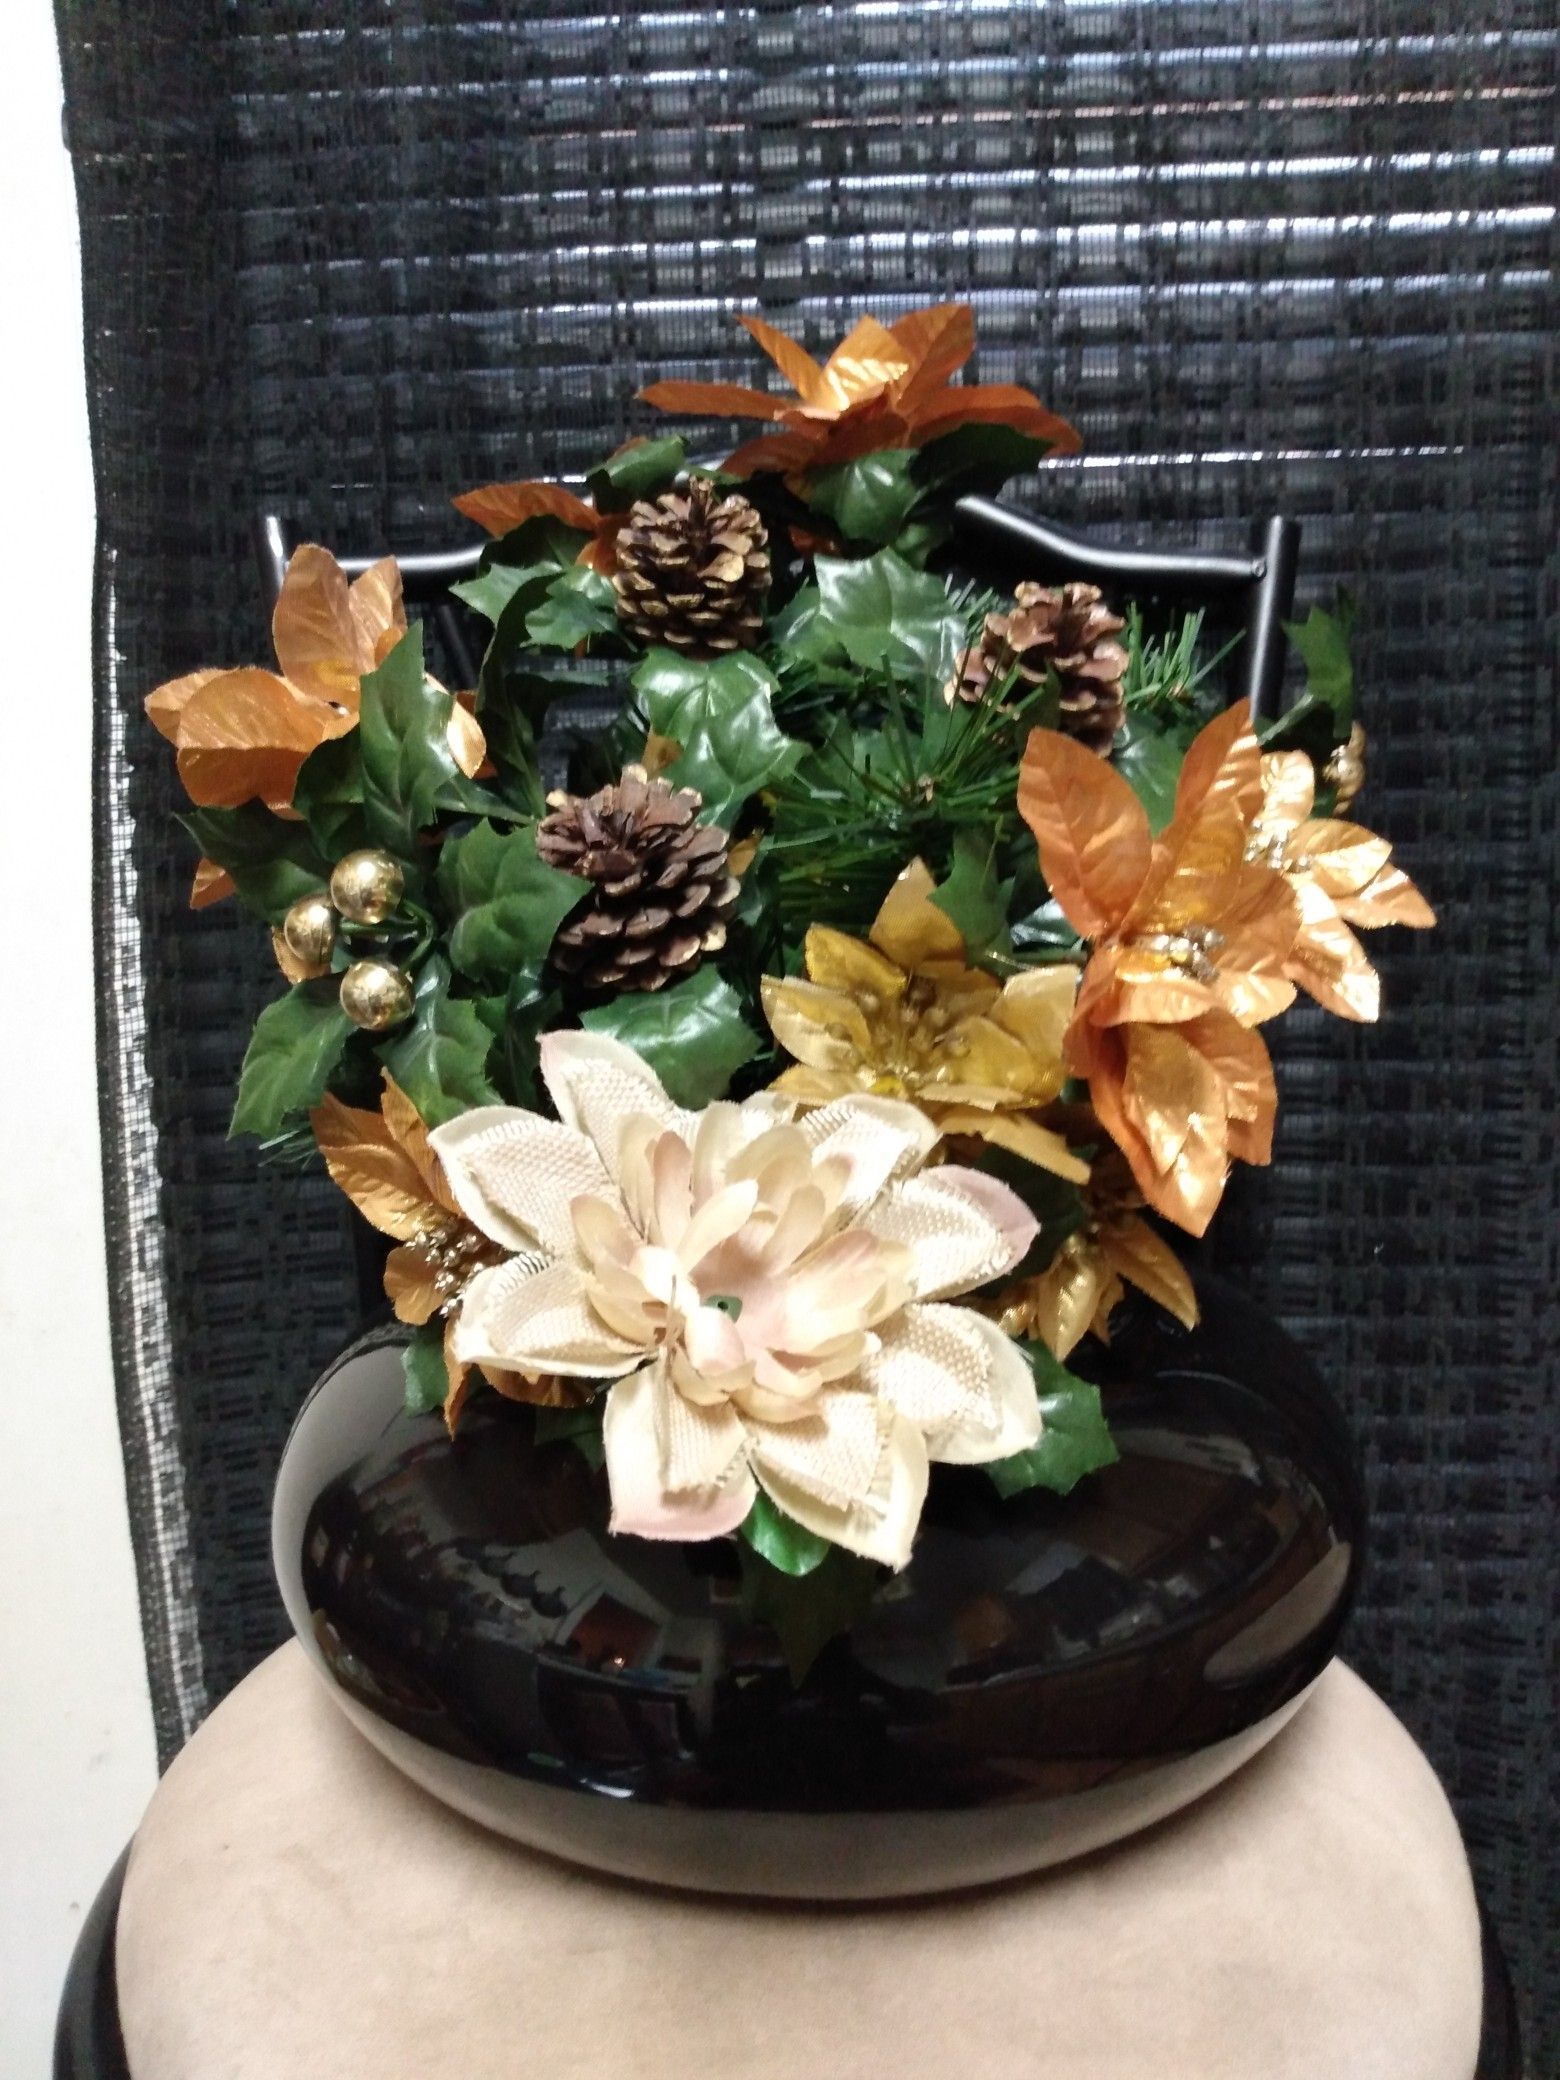 $40 very beautiful Black/Gold flowers decorations in black round beautiful vase. $50 for vase & picture.